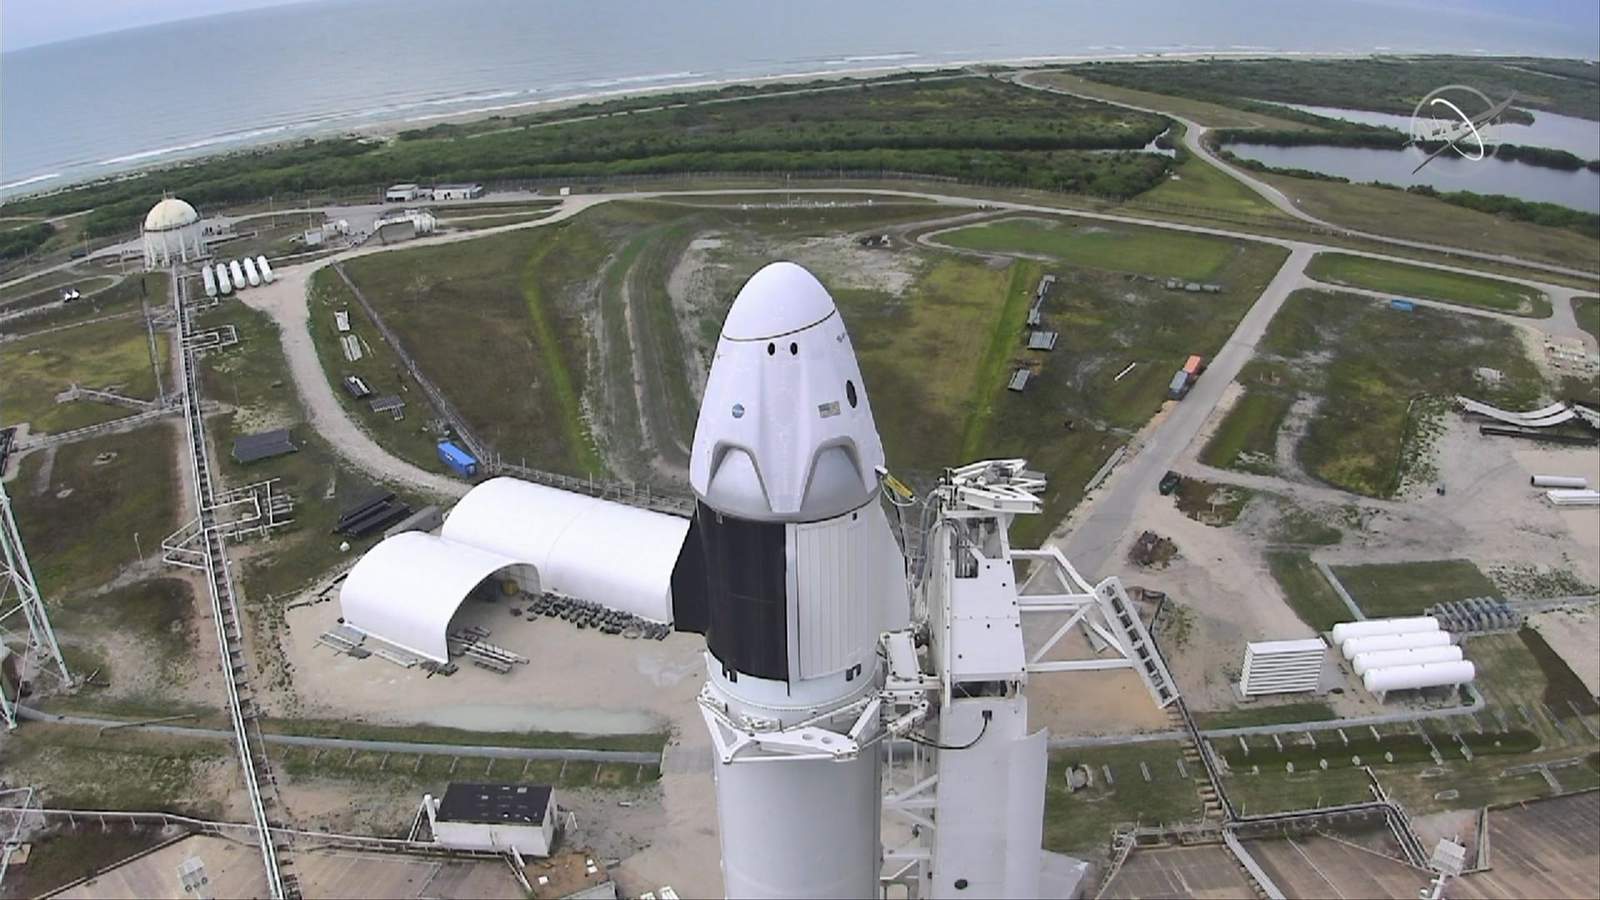 SpaceX-NASA launch: What to know ahead of Saturdays planned flight